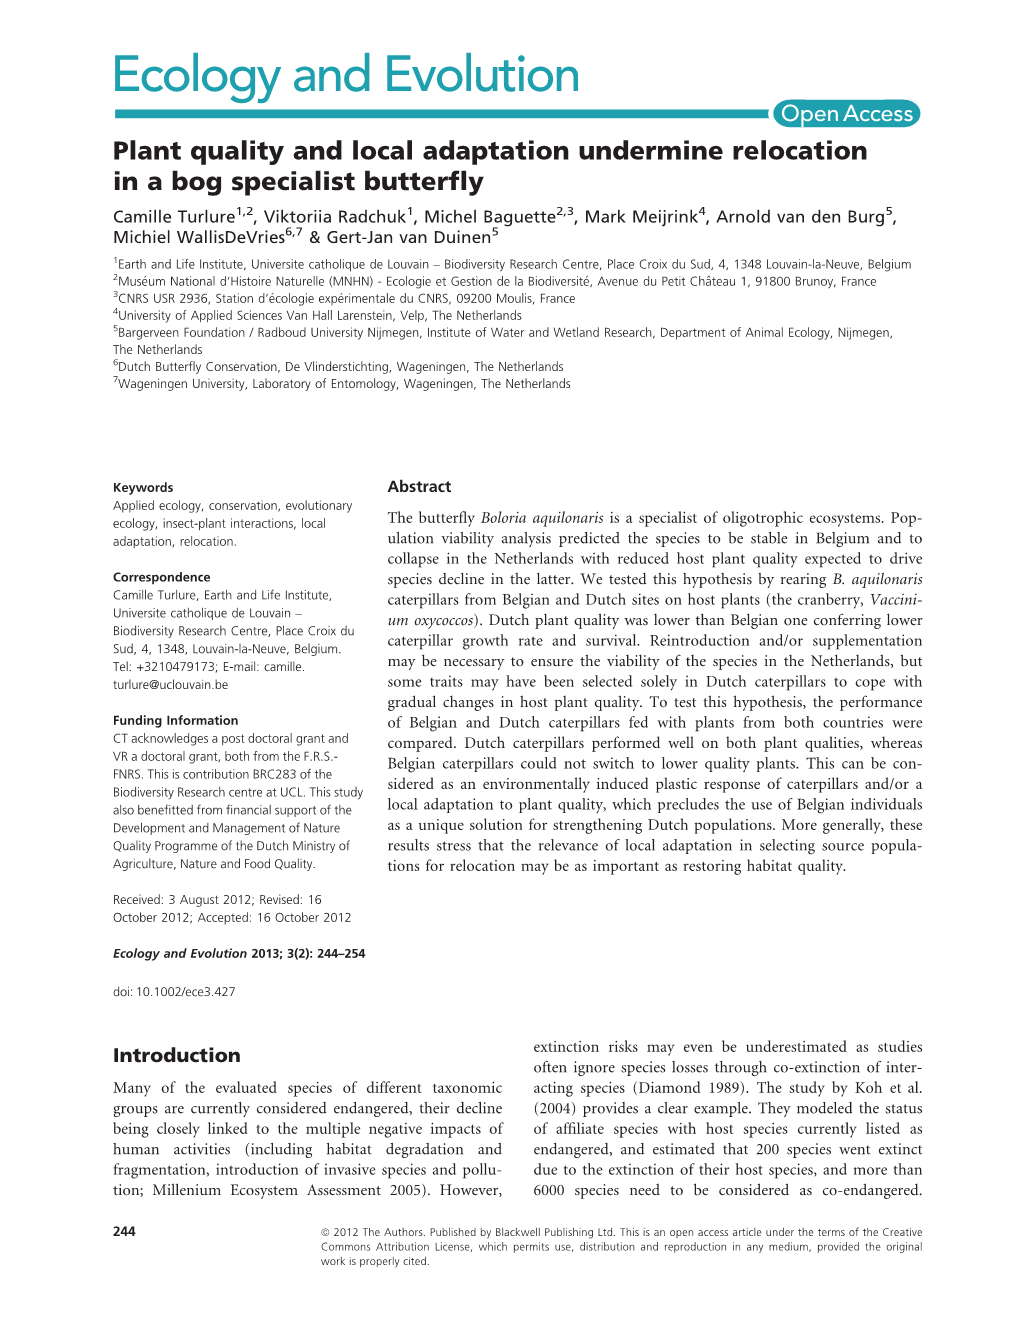 Plant Quality and Local Adaptation Undermine Relocation in a Bog